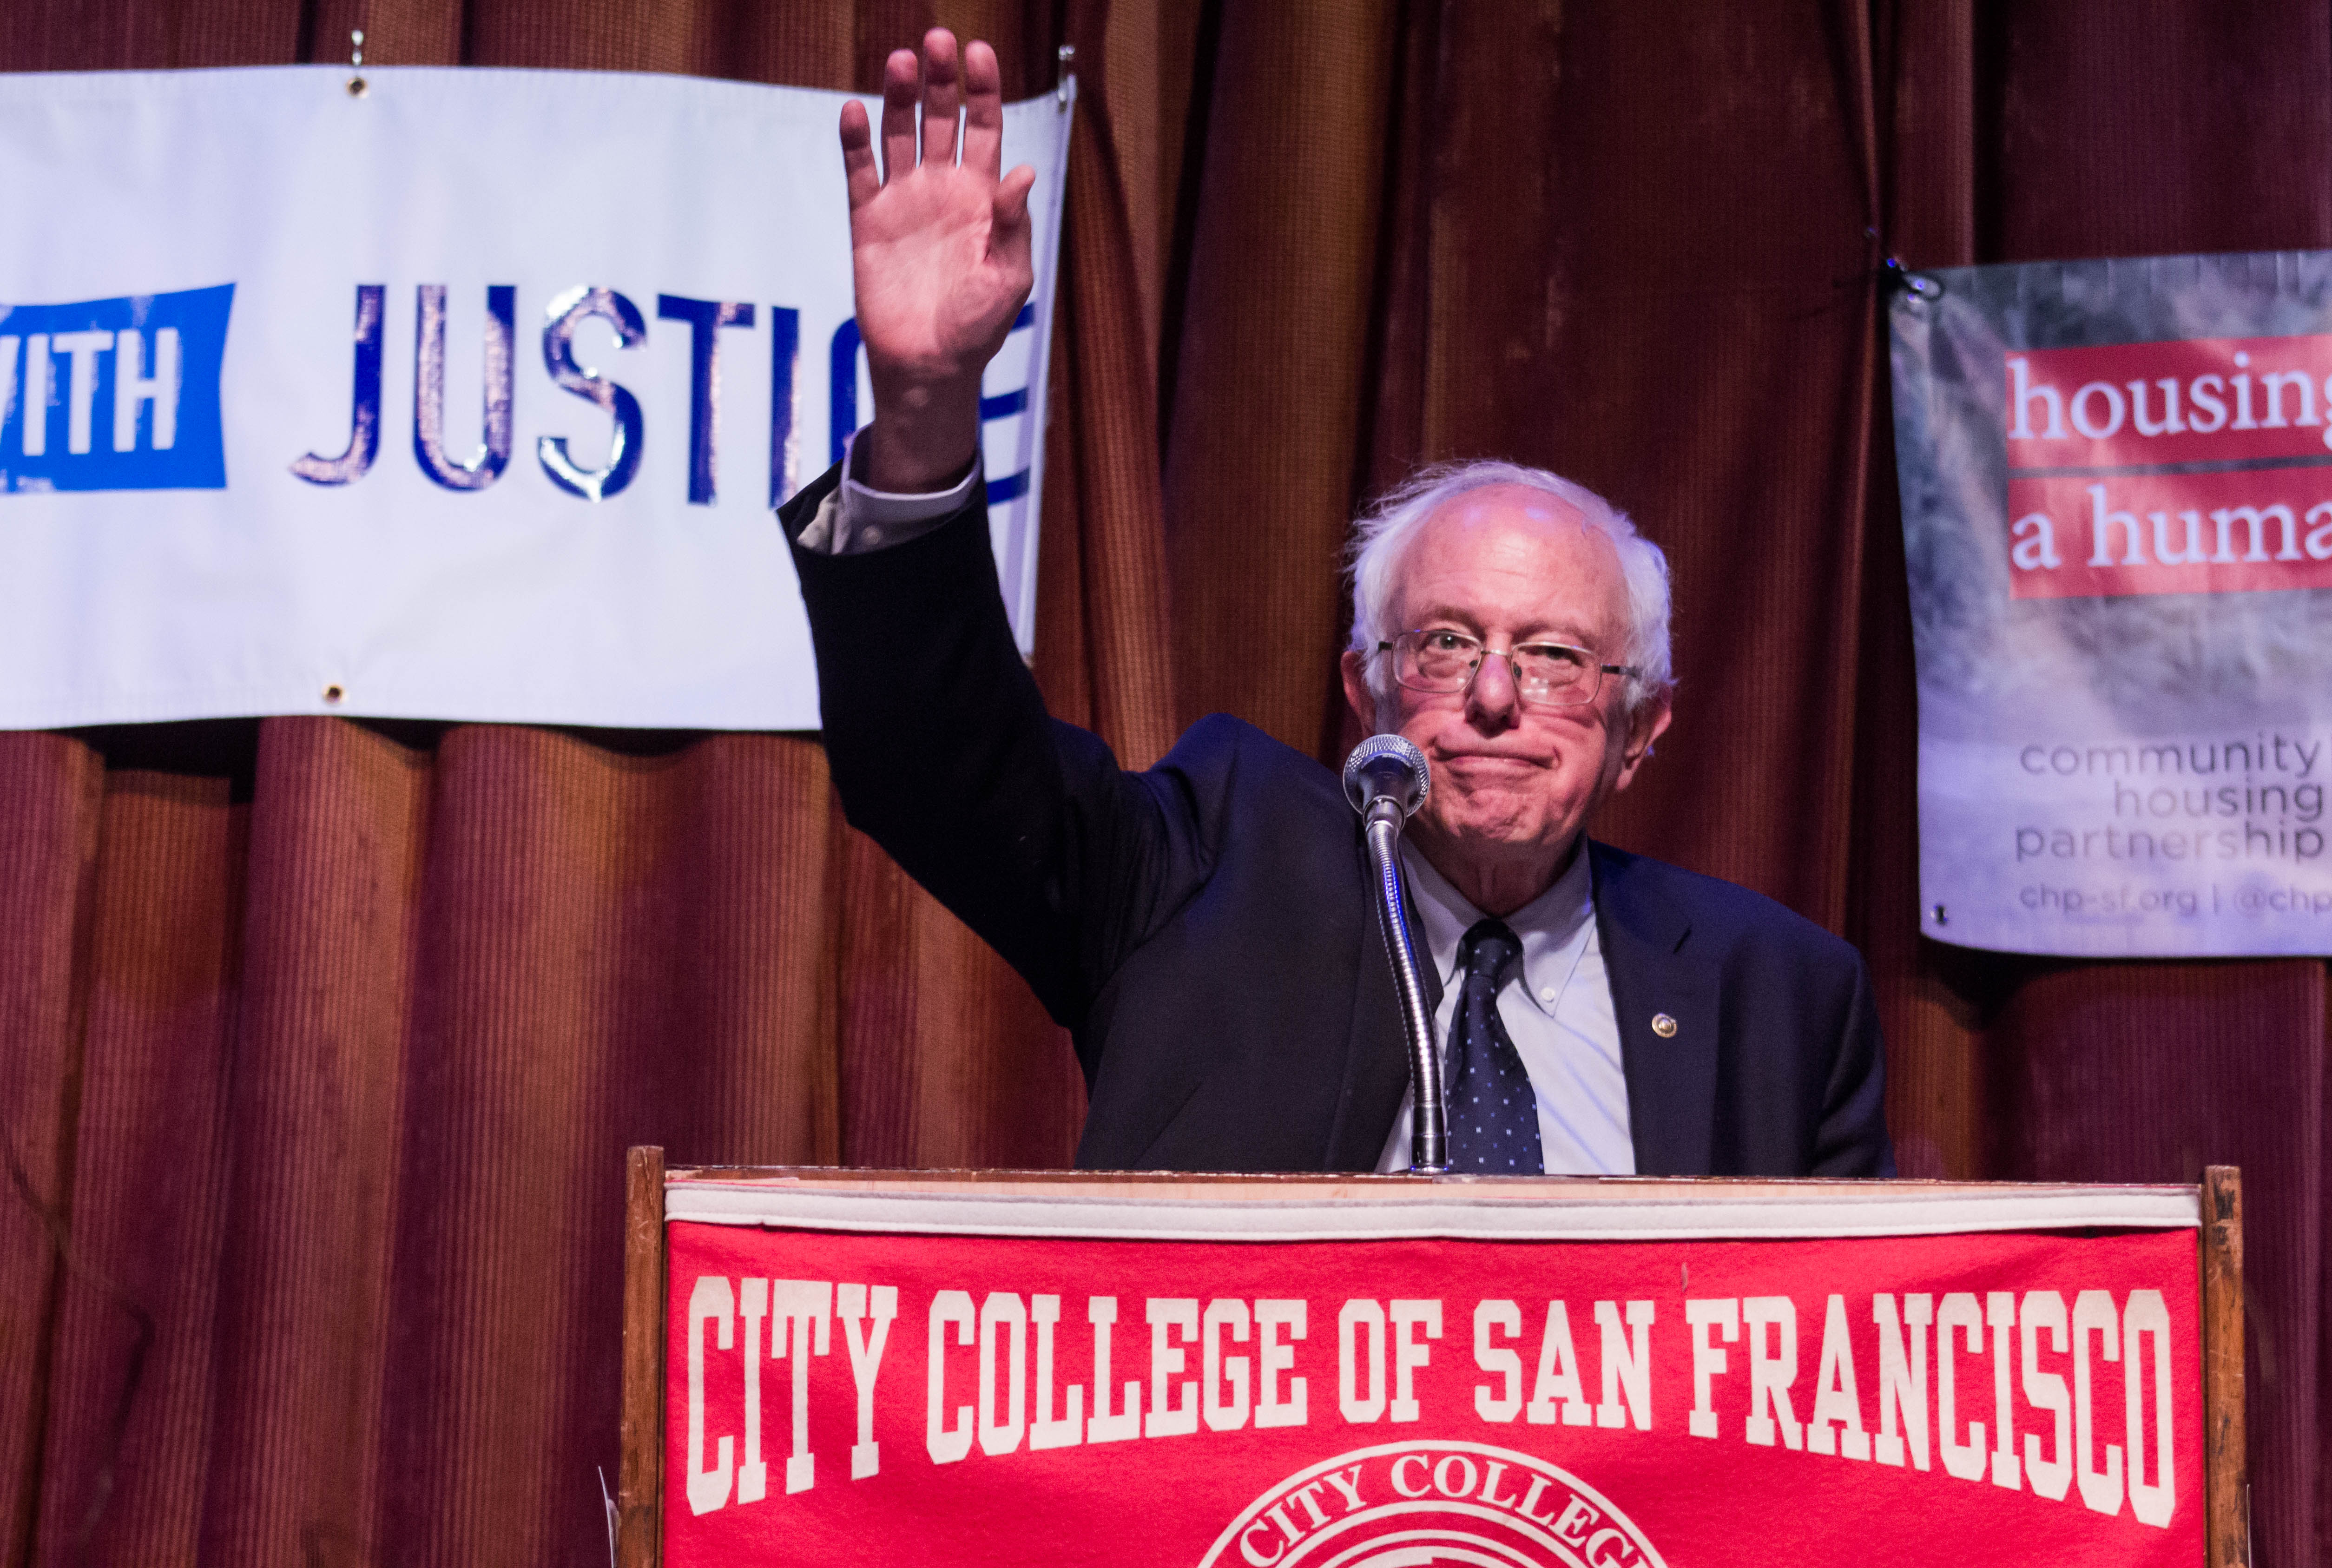 Senator Bernie Sanders waves at the cheering crowd after completing his speech at City College's Diego Rivera Theater on Sept. 22, 2017. (Photo by Jordi Molina/The Guardsman) 